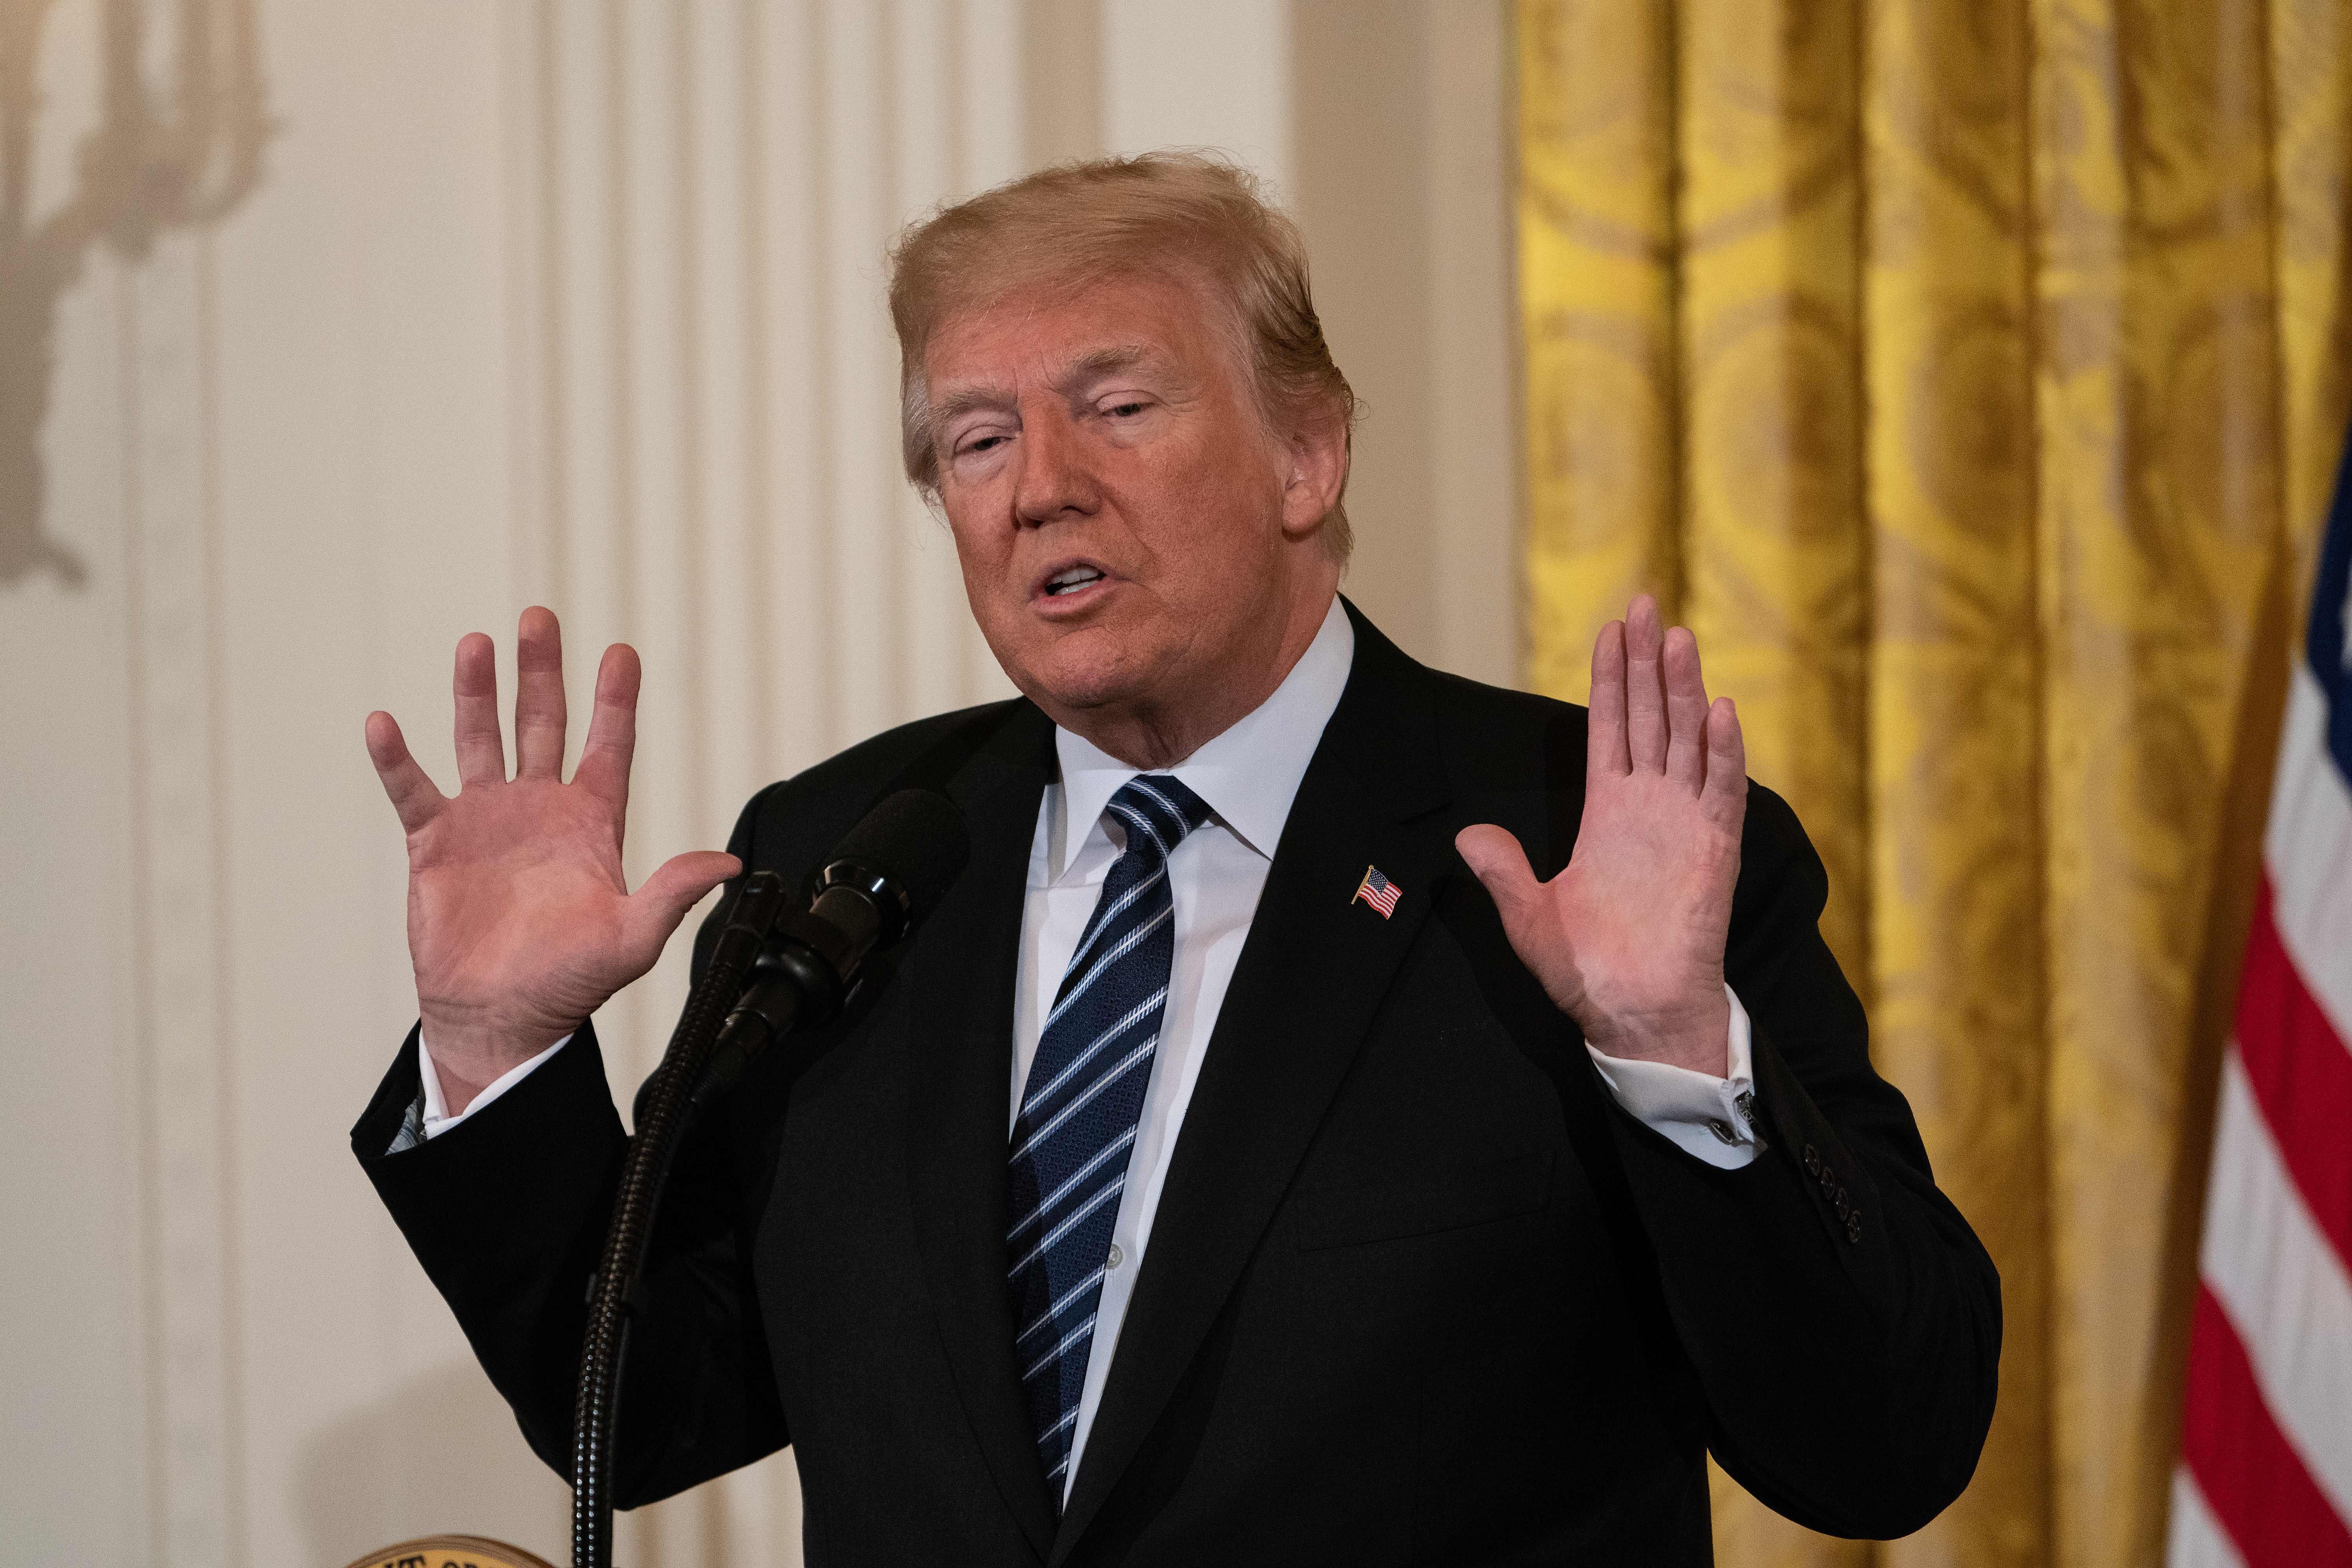 US President Donald Trump addresses a meeting on prison reform at the White House in Washington, DC, on May 18, 2018. (Photo by NICHOLAS KAMM / AFP)        (Photo credit should read NICHOLAS KAMM/AFP/Getty Images)